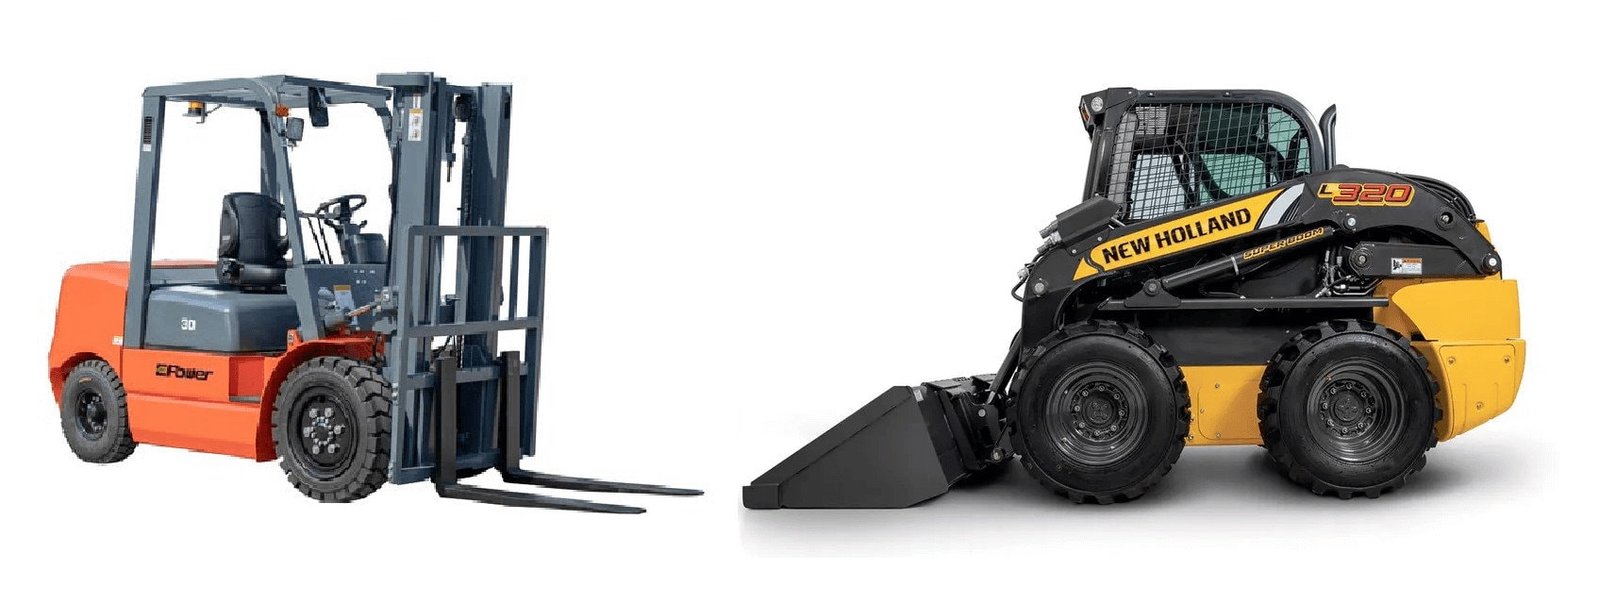 Photograph of a skid steer loader and a forklift